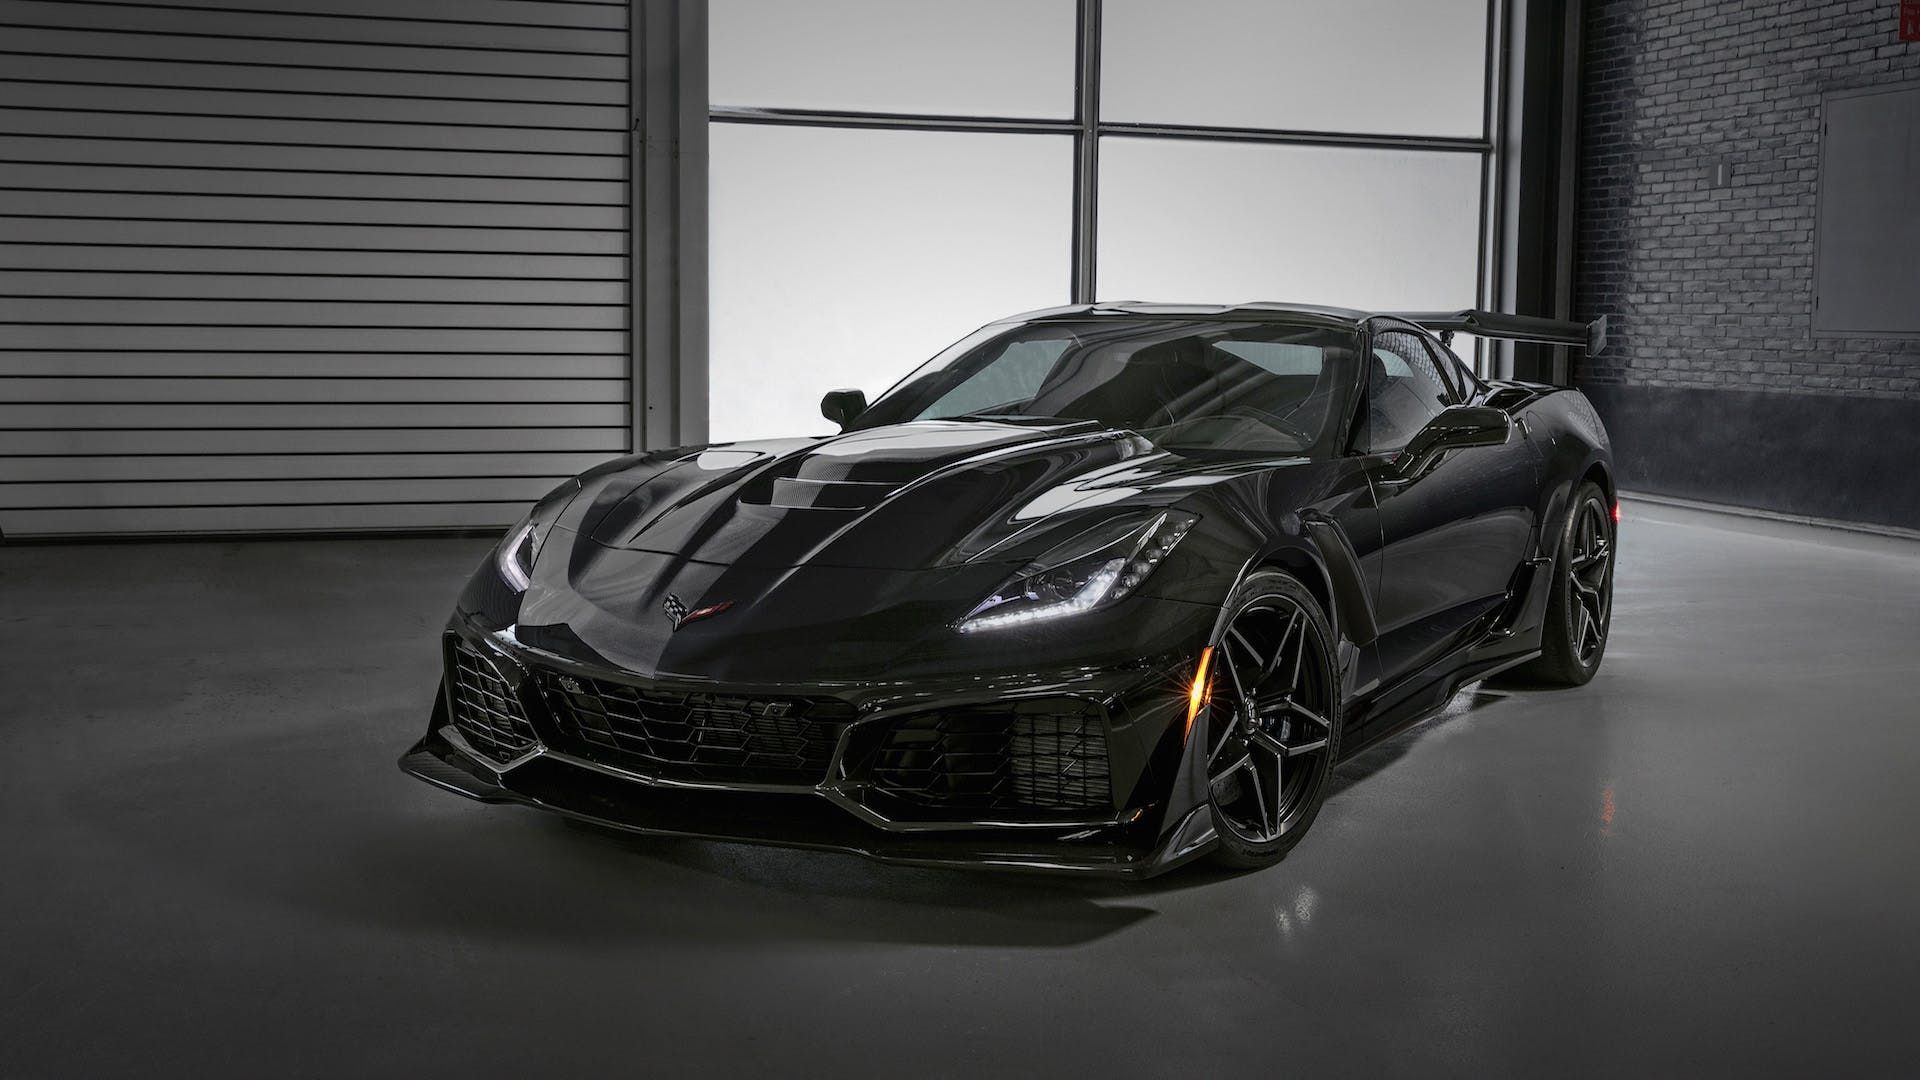 The ZR1